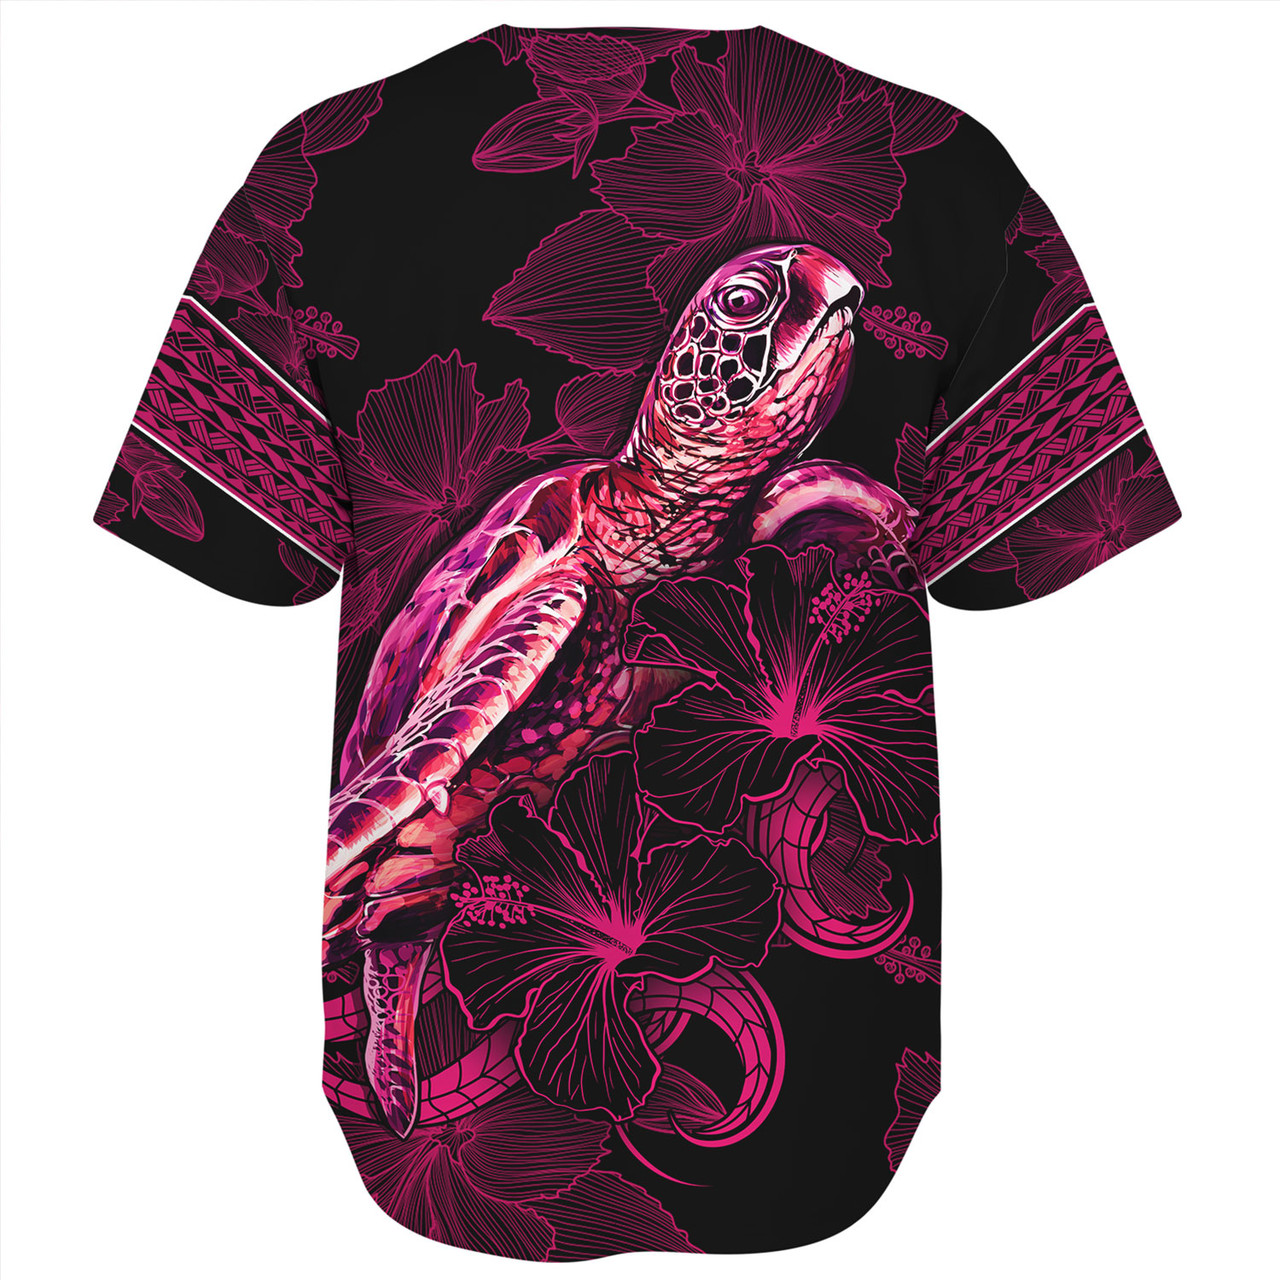 Yap State Baseball Shirt Sea Turtle With Blooming Hibiscus Flowers Tribal Maroon